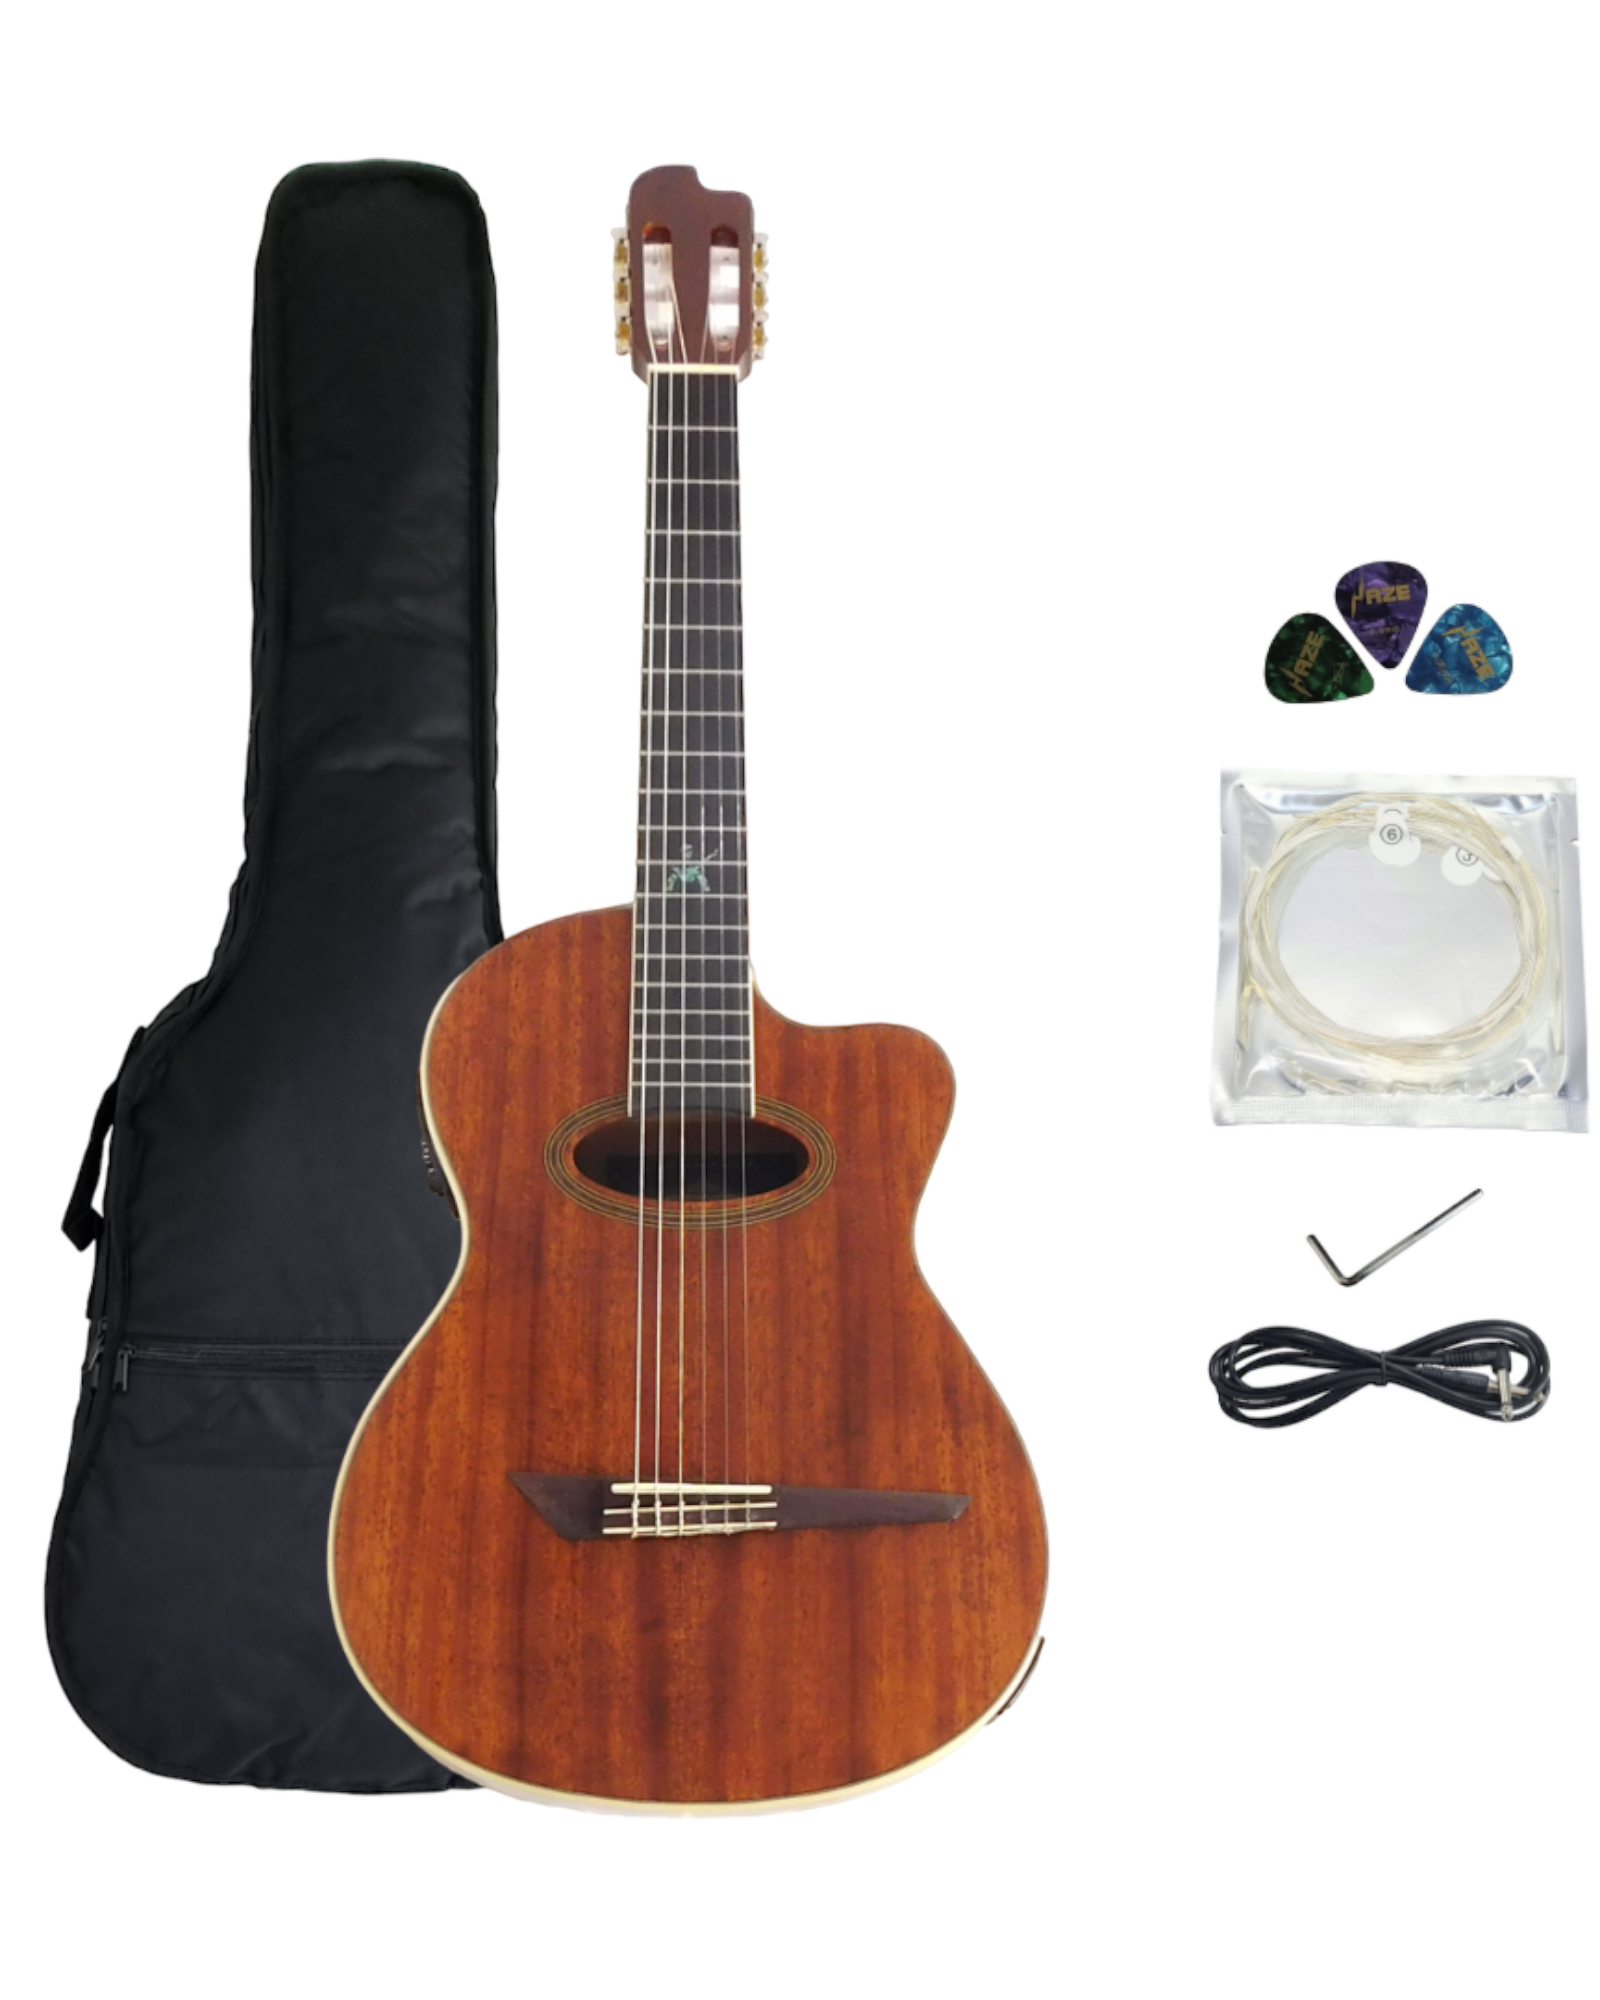 Miguel Rosales Mahogany Oval Soundhole Built-In Pickup/Tuner Classical Guitar - Natural MR04CEQN